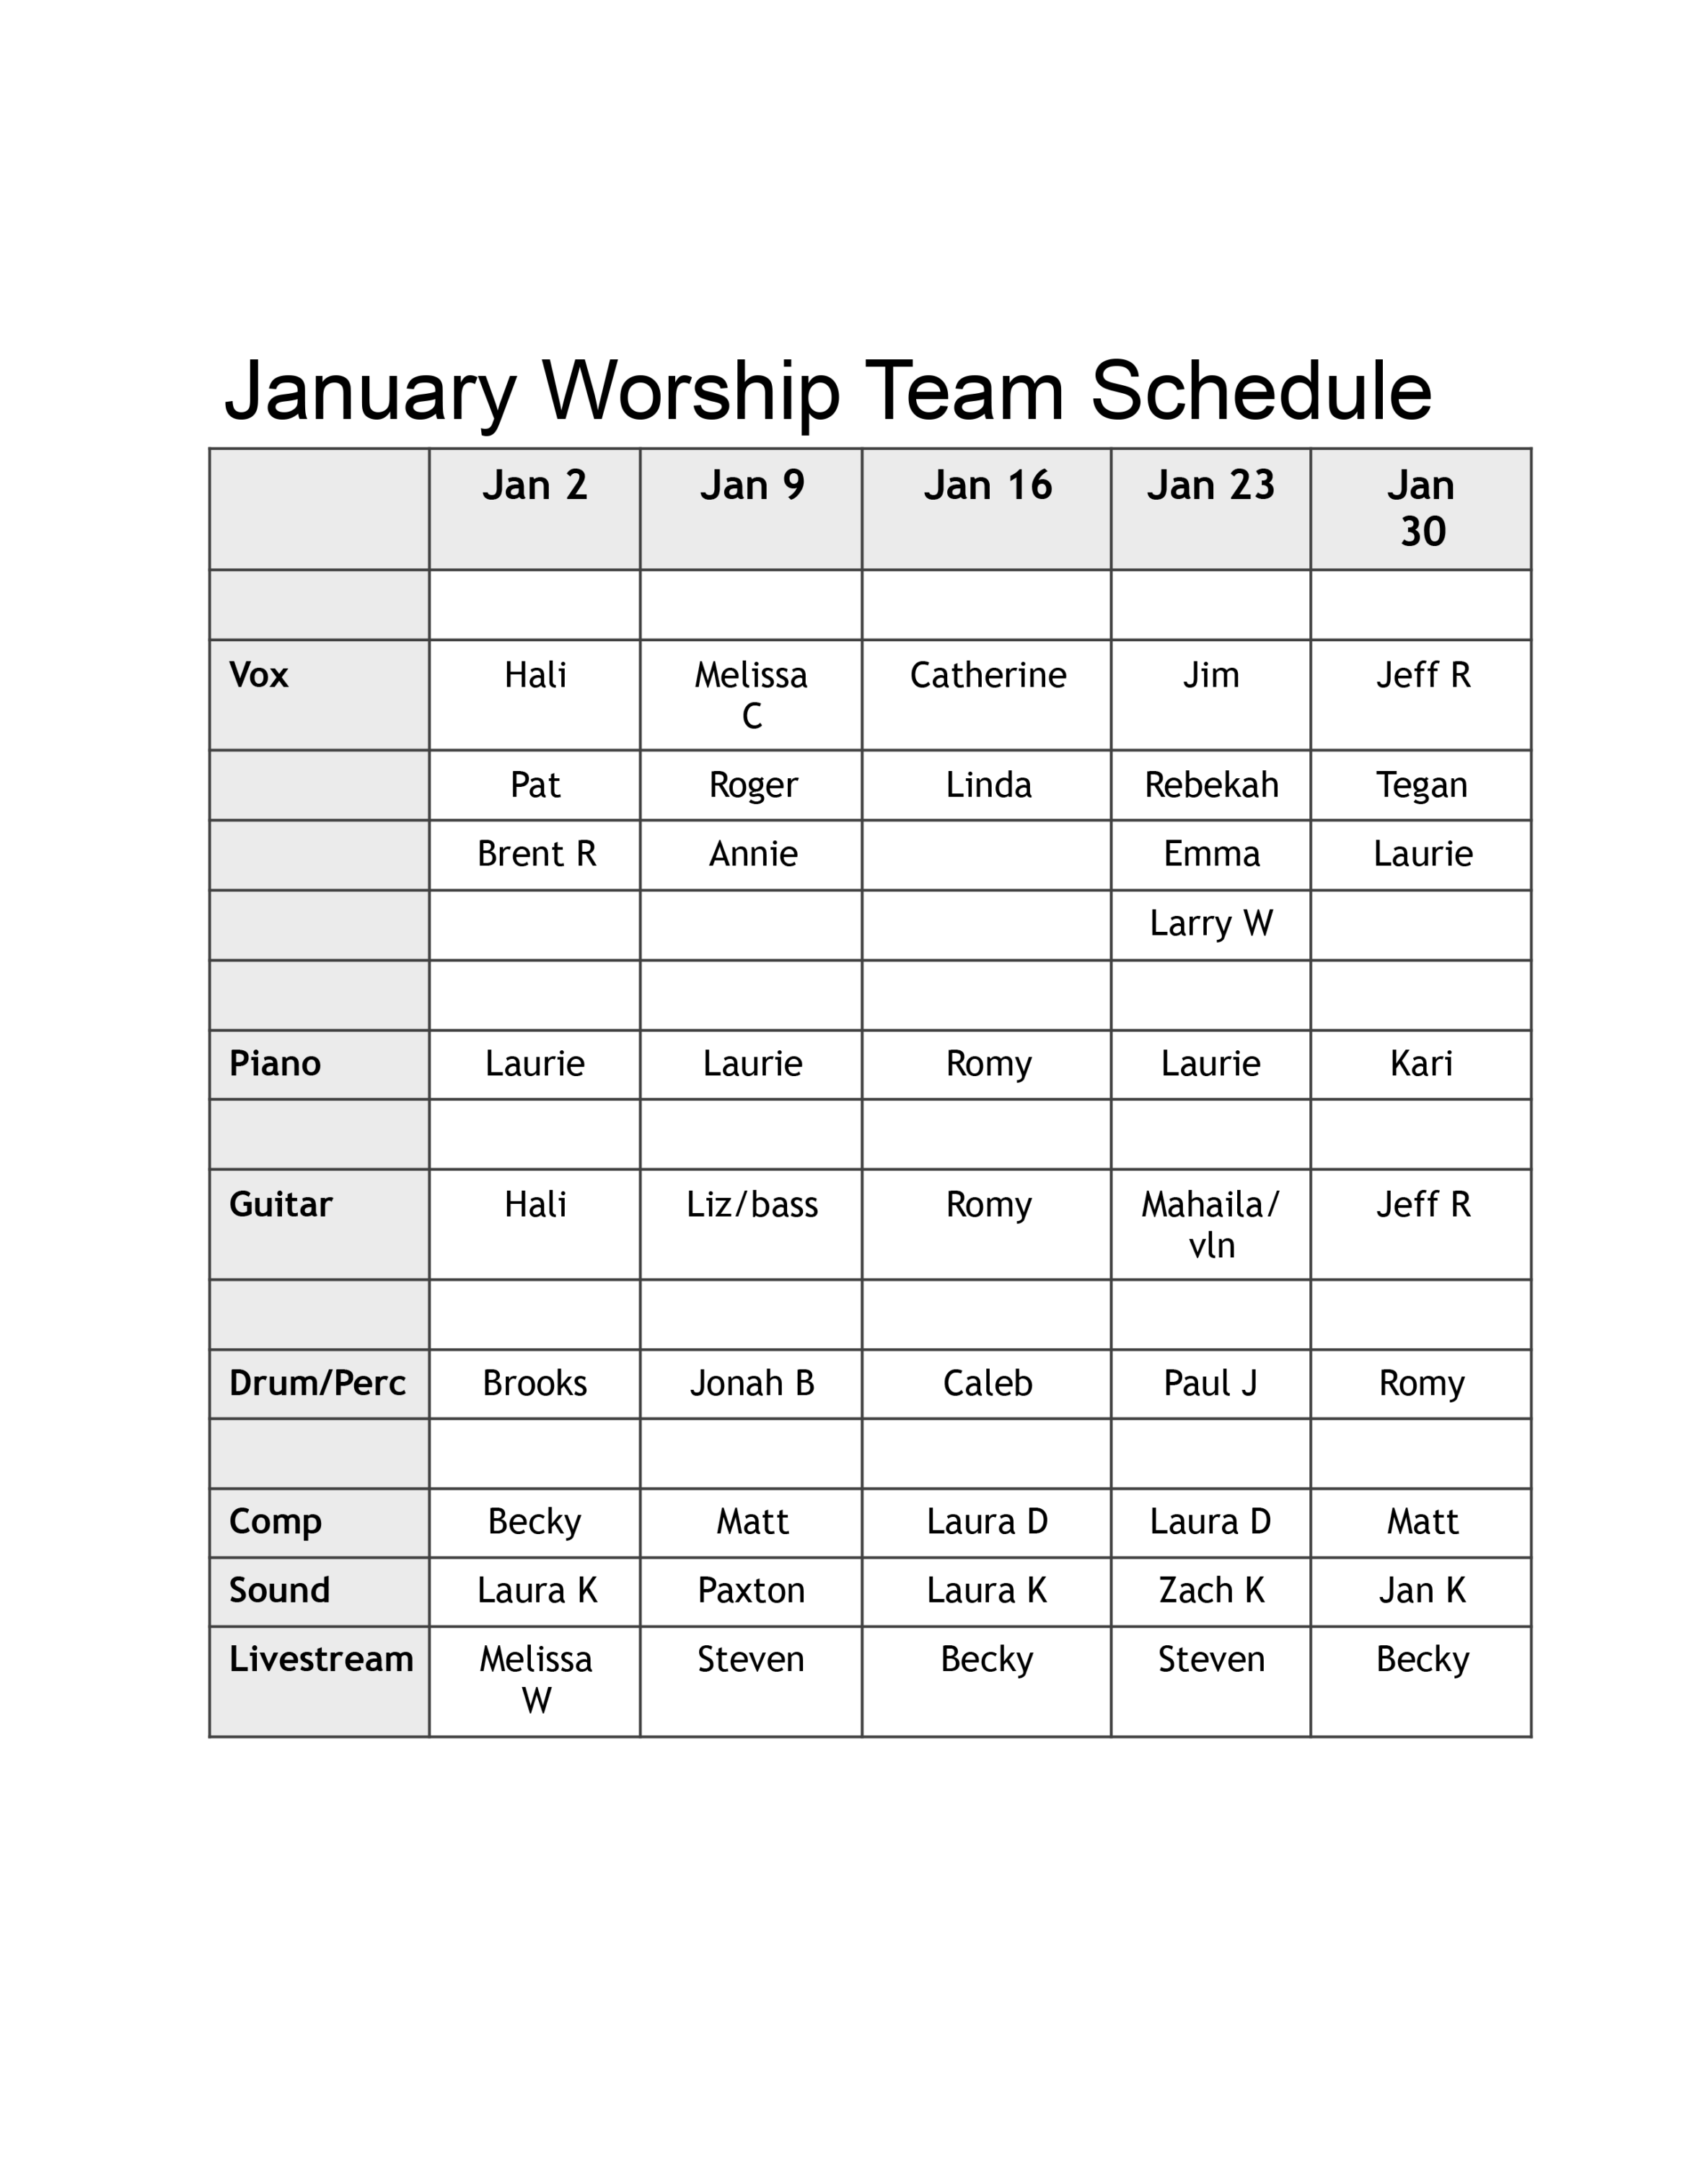 January-WT-Schedule.png